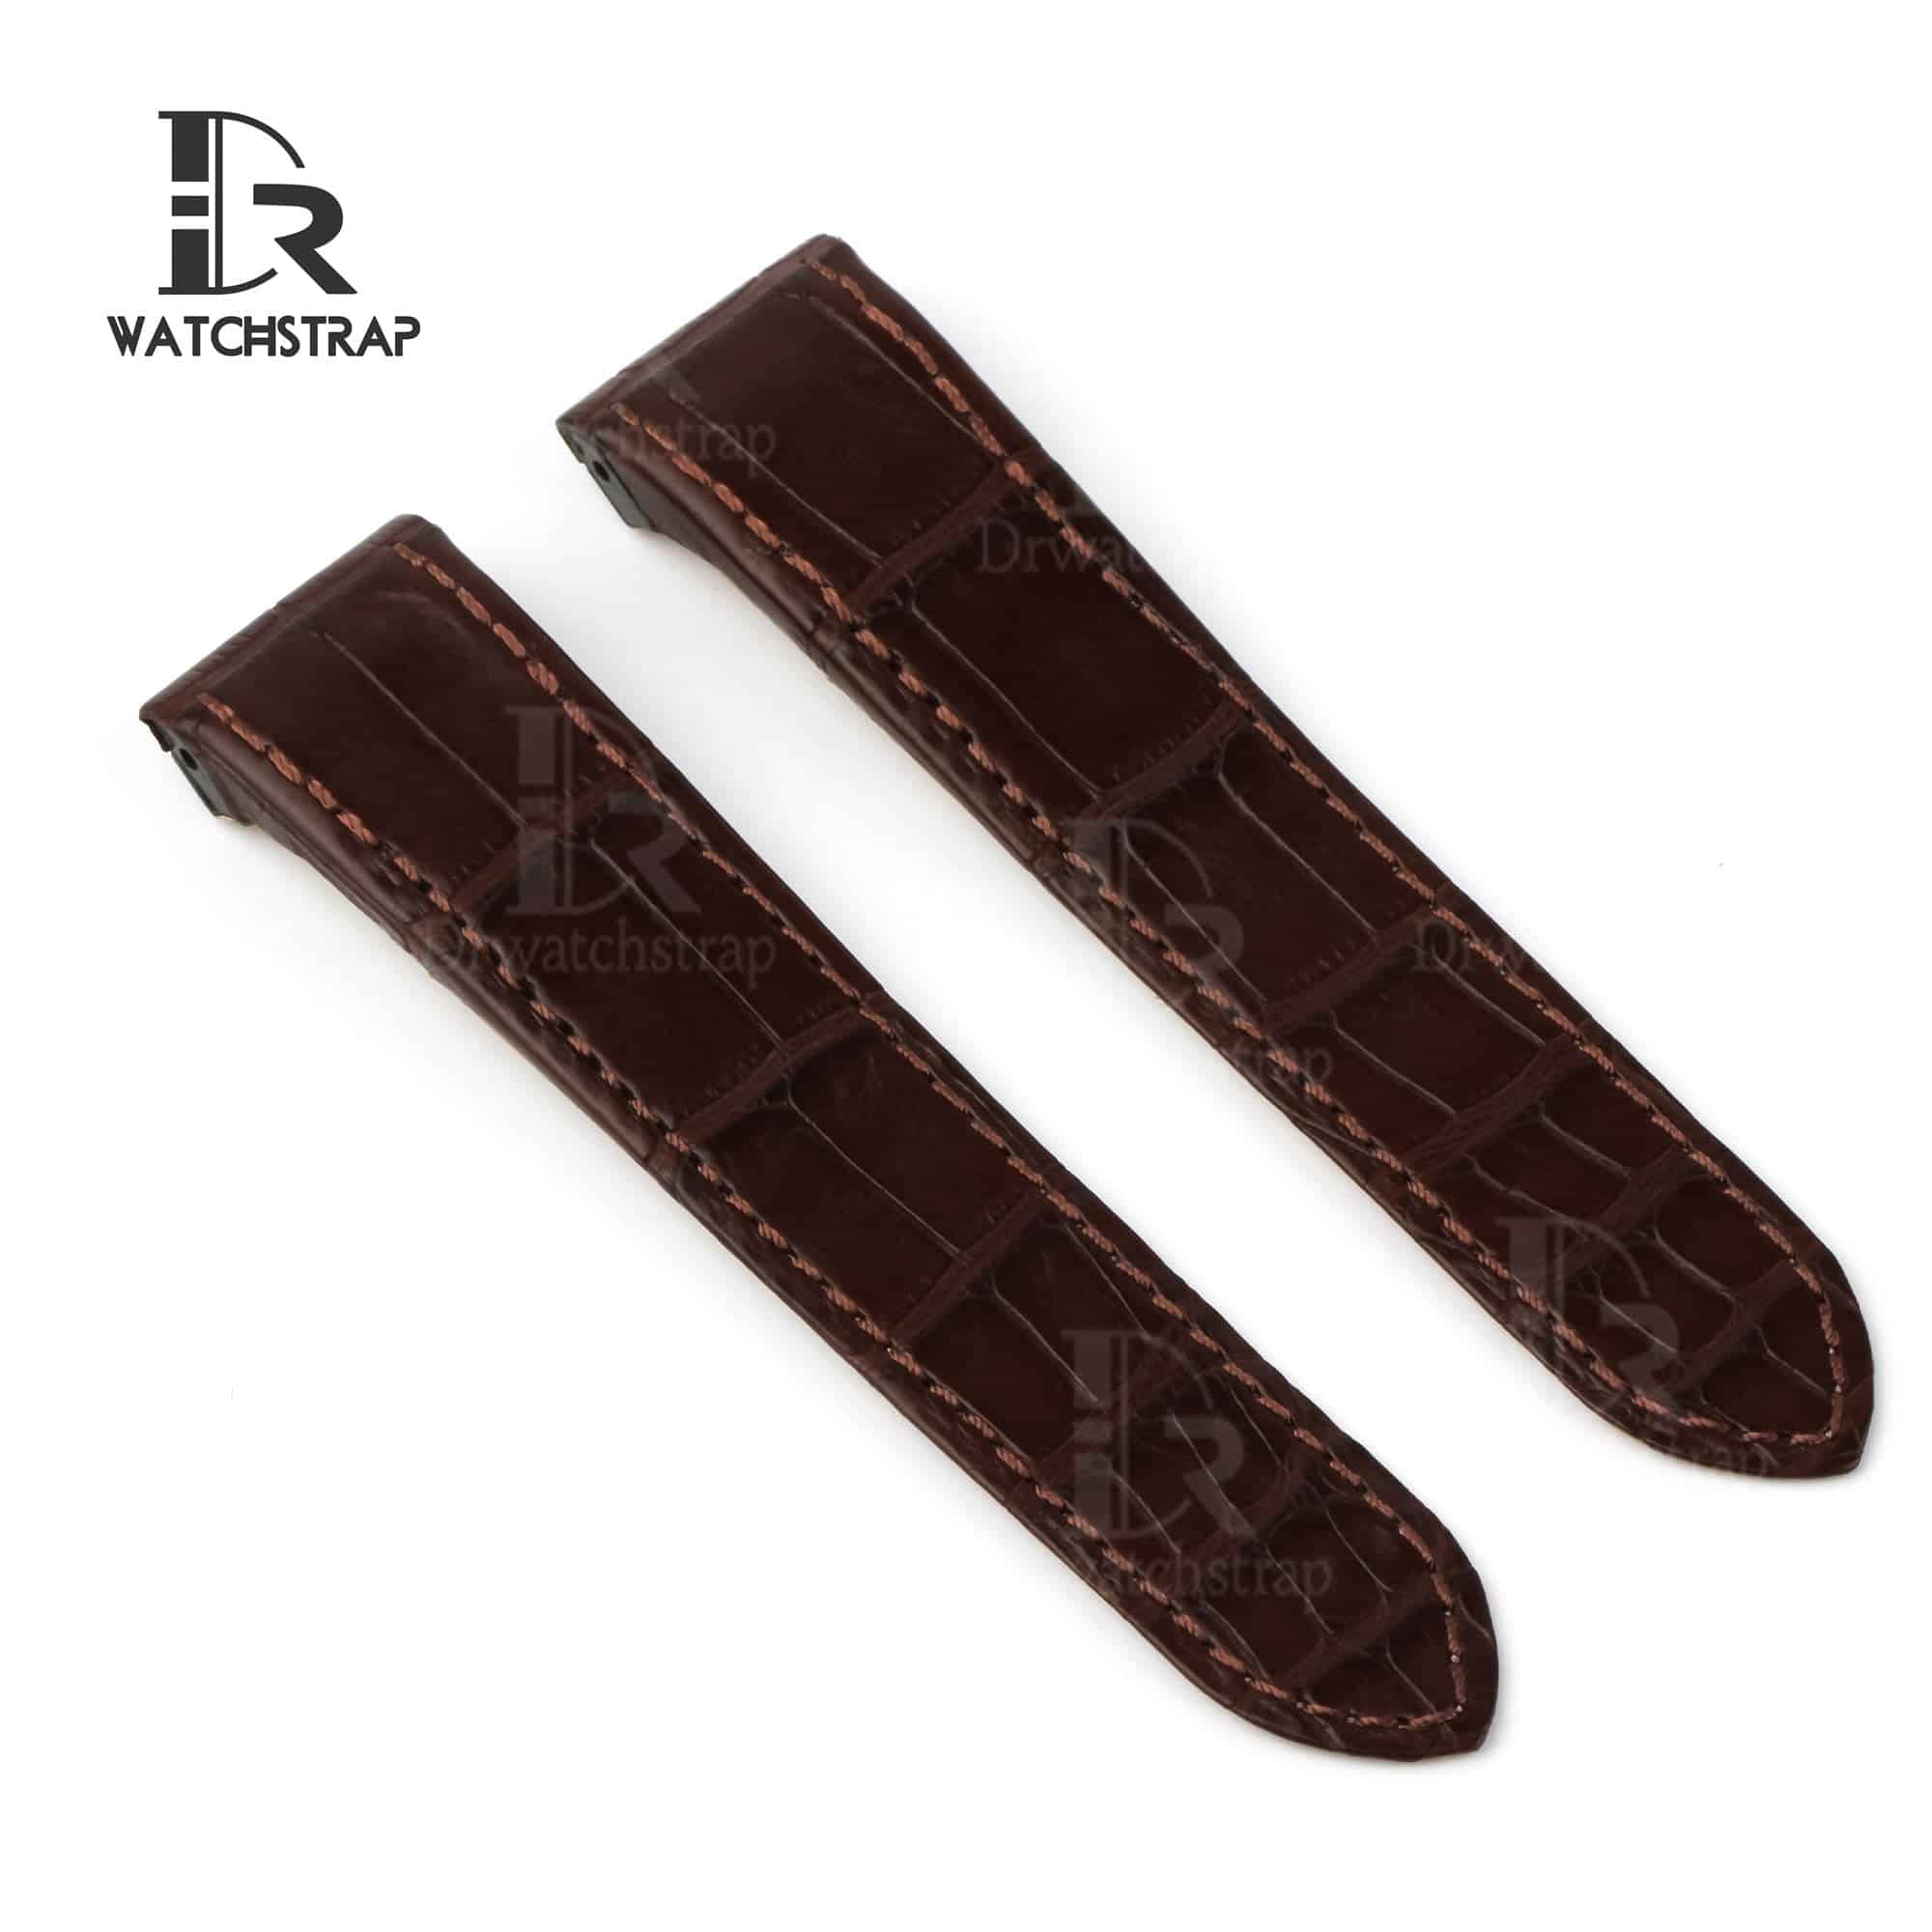 Custom handmade best quality replacement Brown America Alligator Leather Cartier Santos 100 watch straps and watch bands Cartier Santos 100 Midsize Large Chronograph XL size watches - OEM aftermarket high-end leather watchbands online at a low price